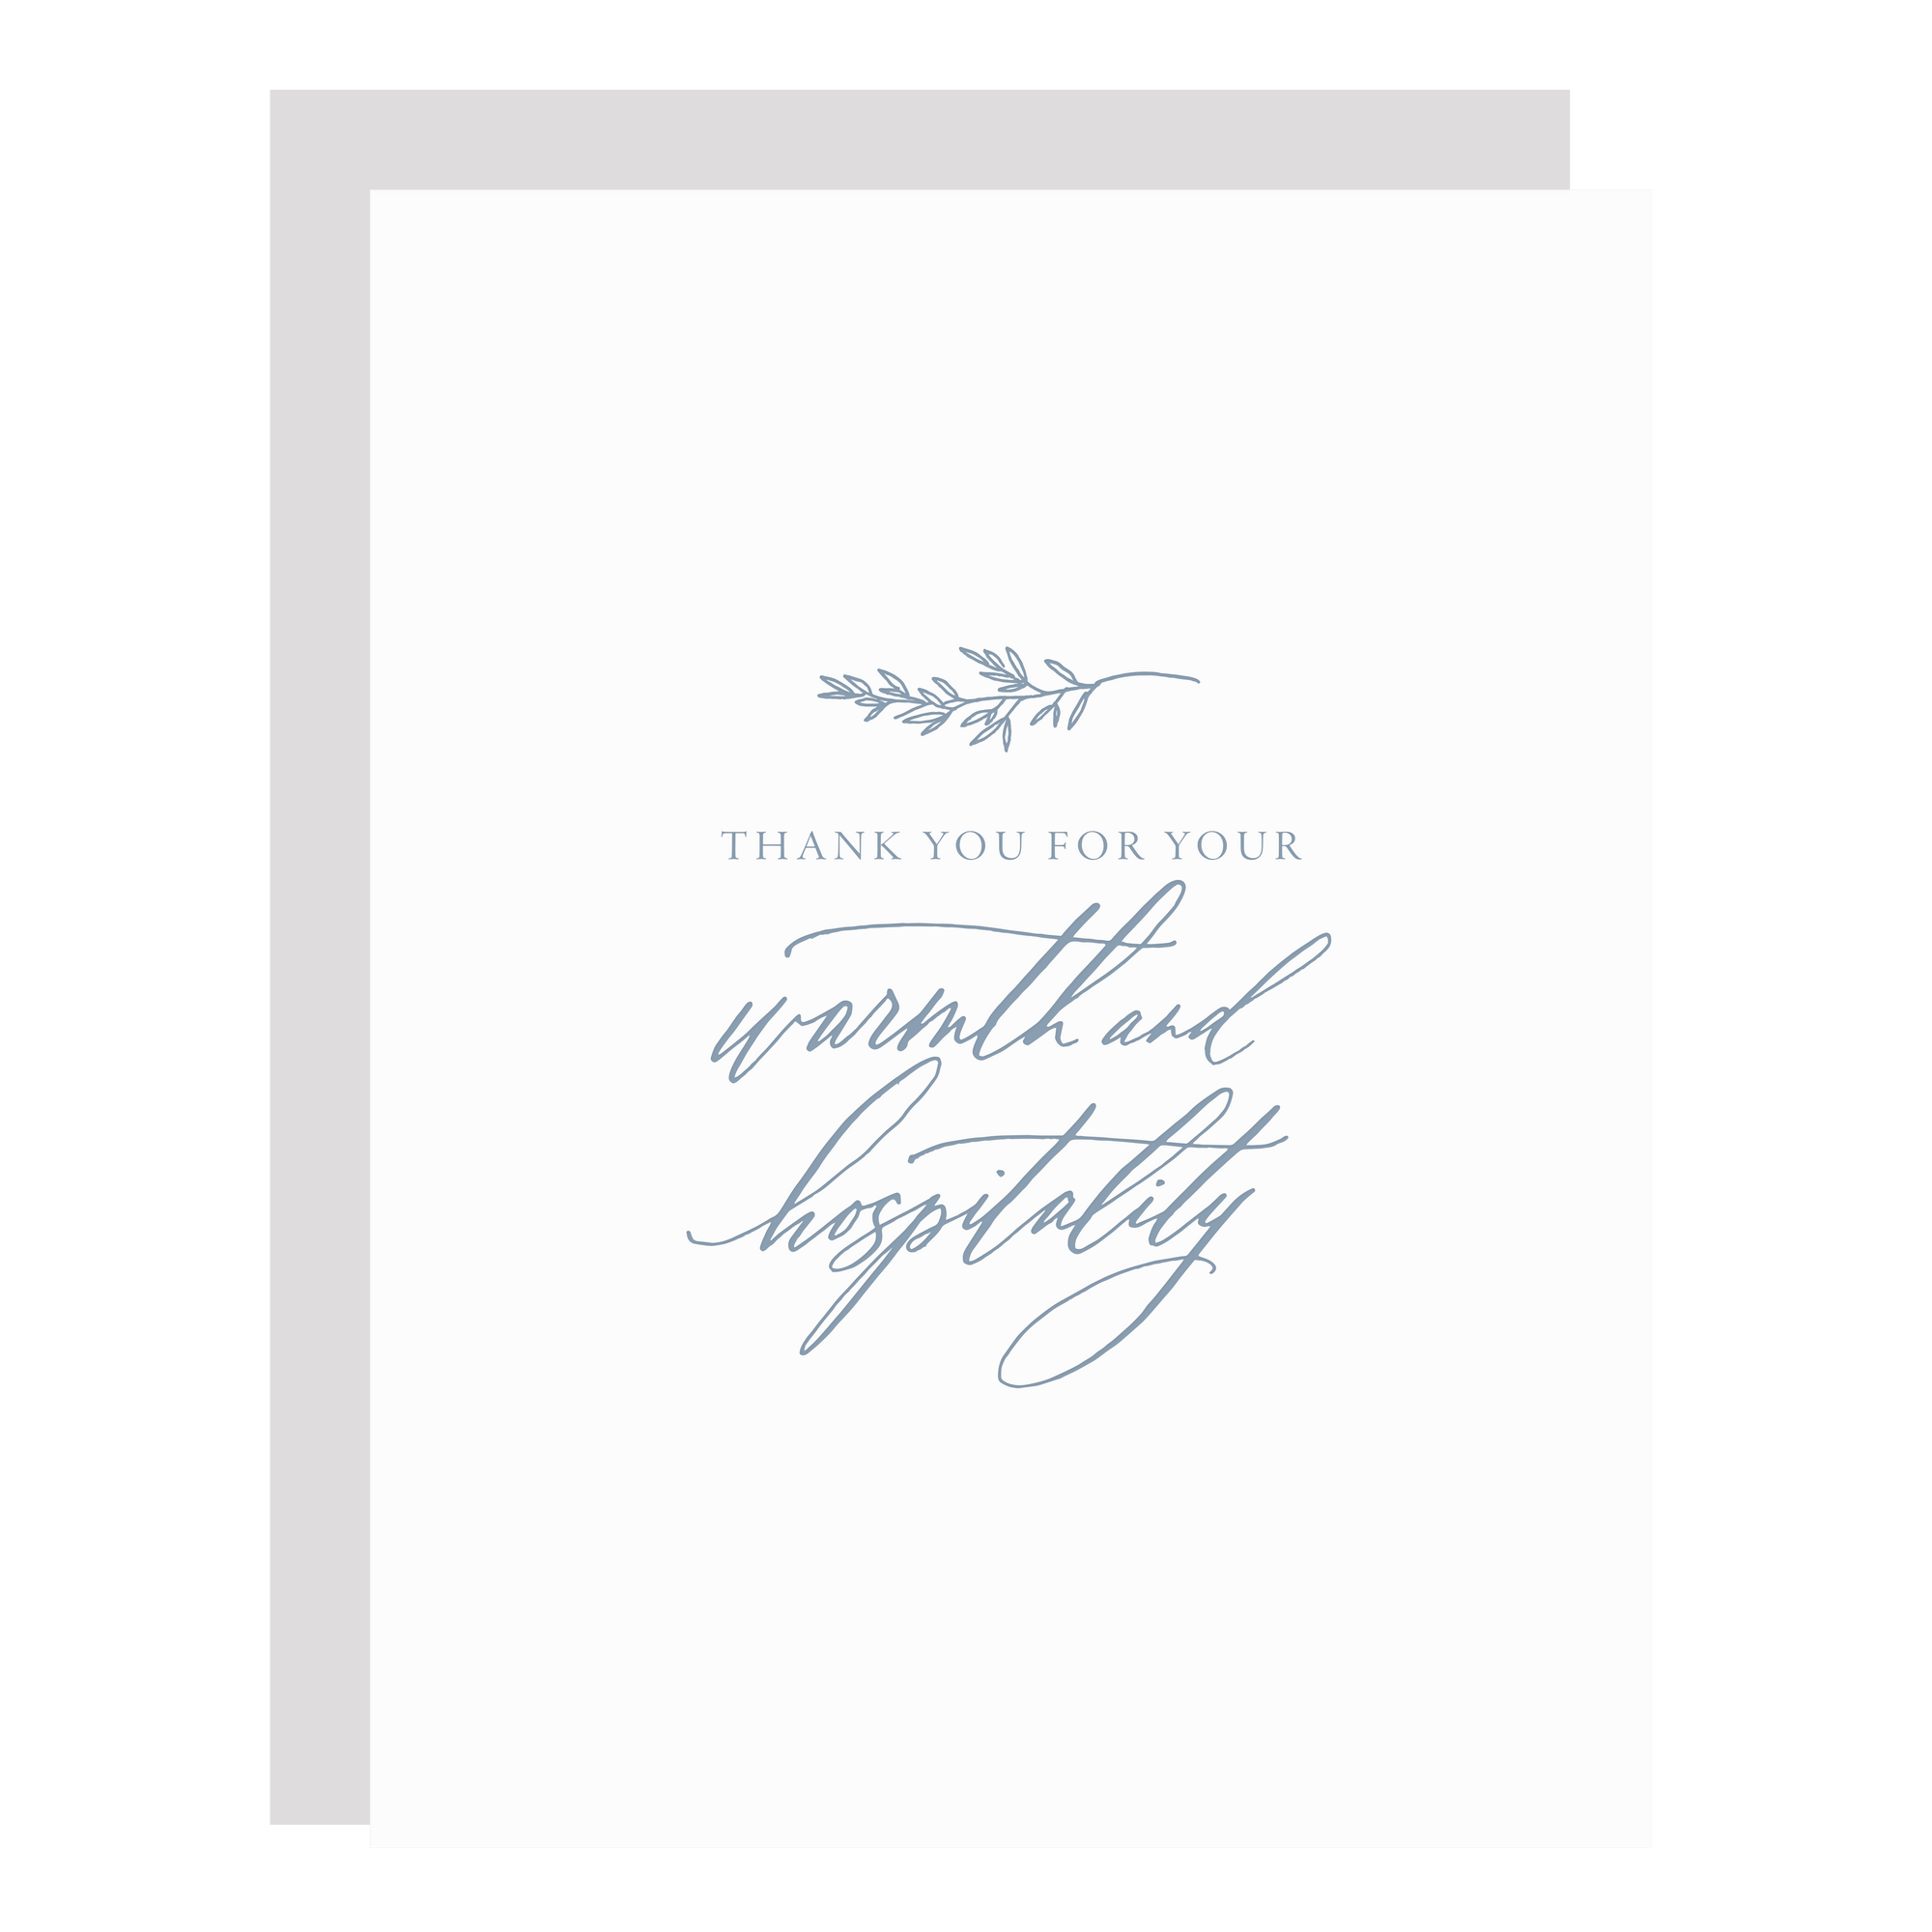 "Warmth and Hospitality" card, letterpress printed by hand in dusty blue ink.